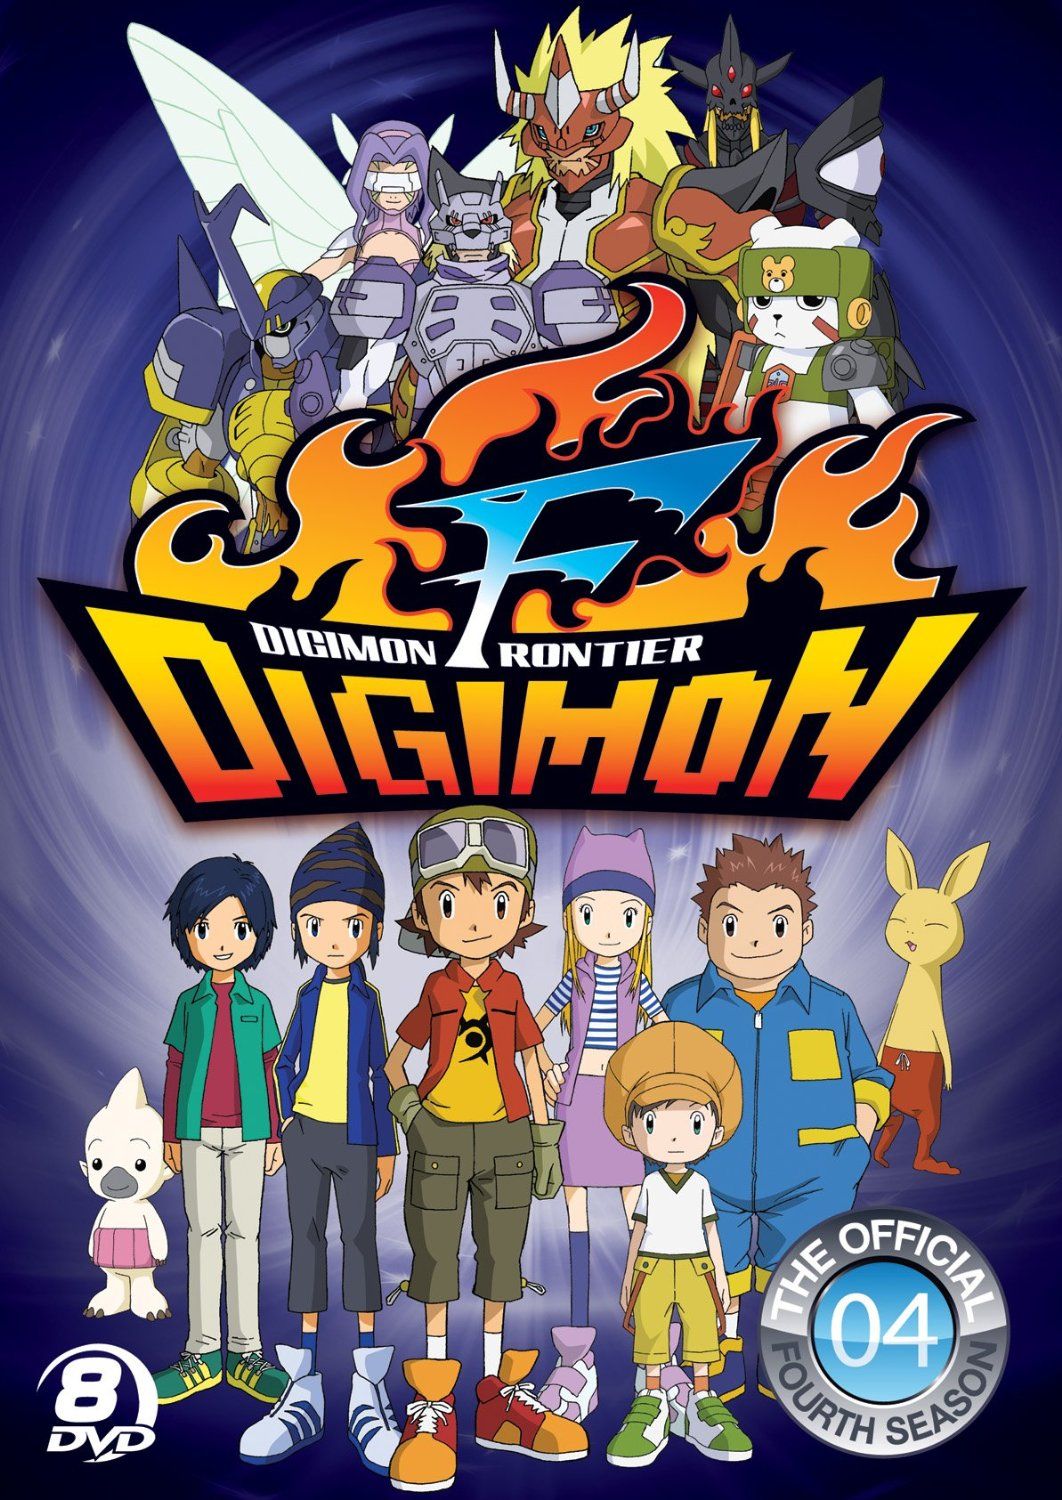 Digimon Frontier DVD Set and Volume 4 in September, Updated w/ Coverart [Archive] the Will // Digimon Forums. Digimon seasons, Digimon frontier, Digimon